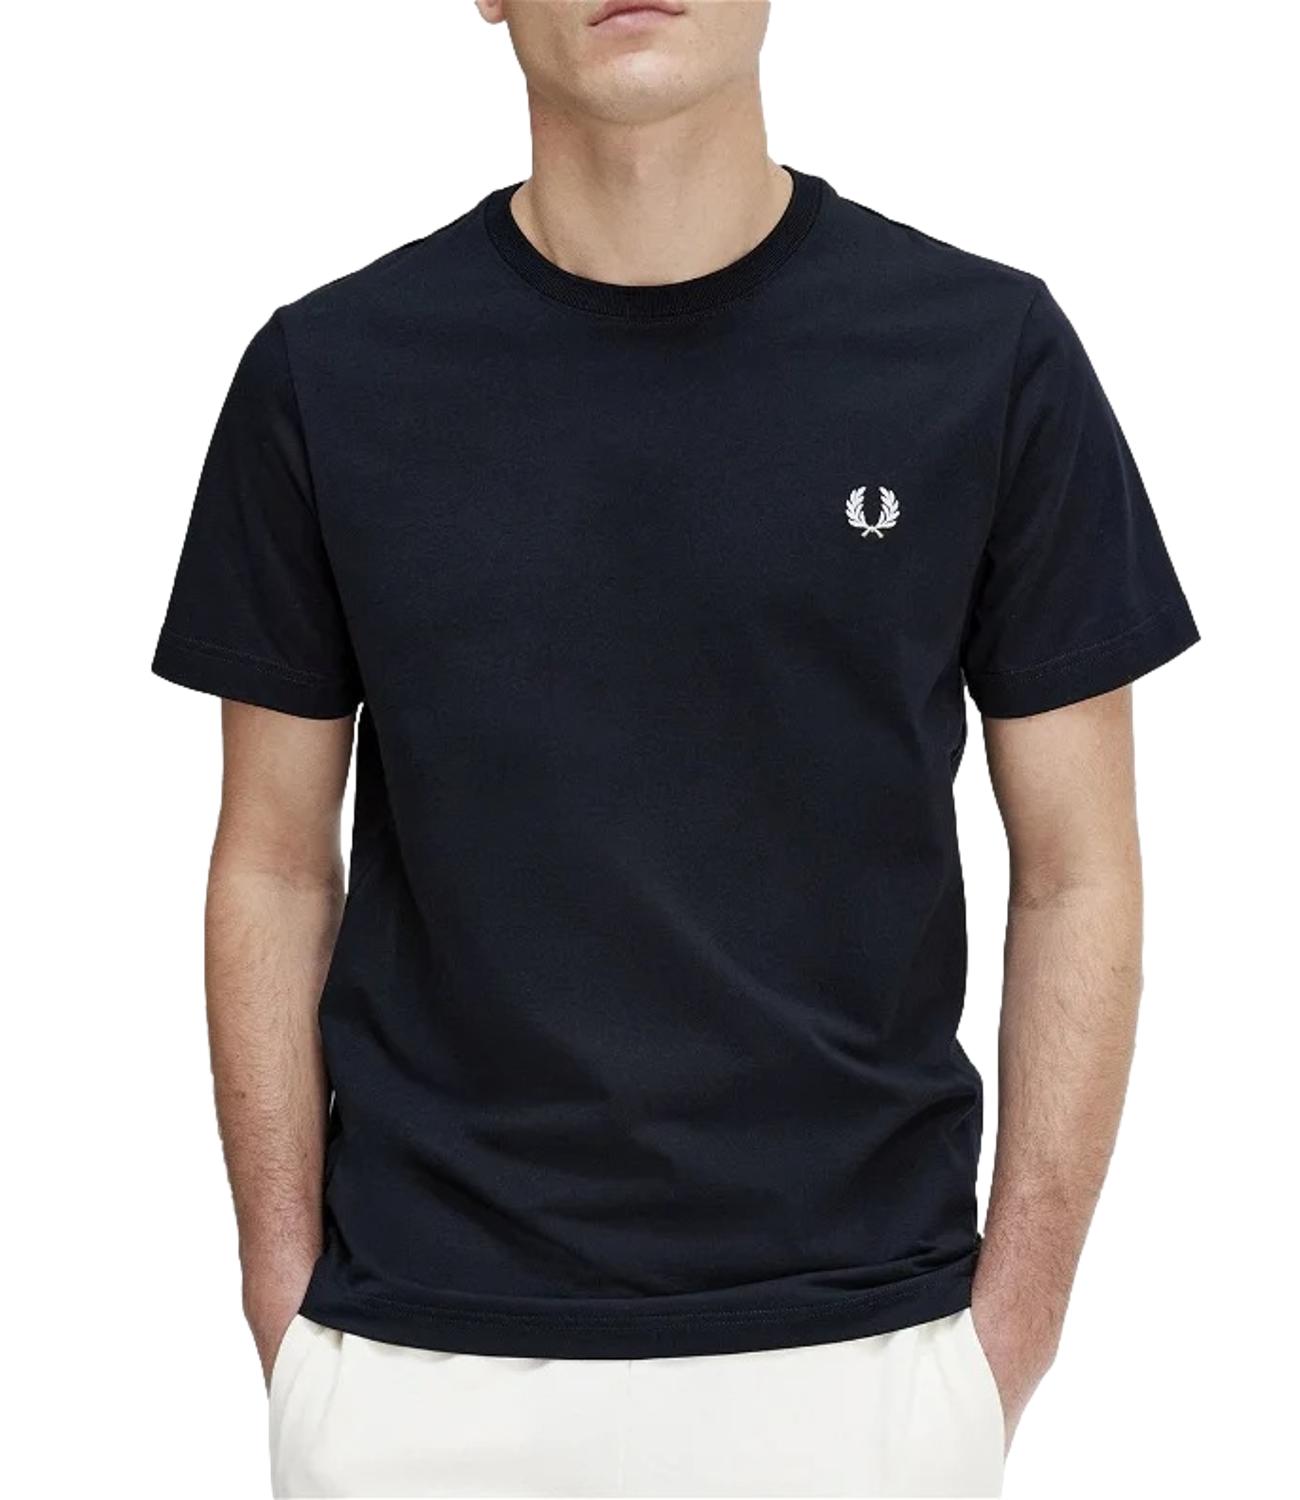 Fred Perry t-shirt blu navy Crew neck